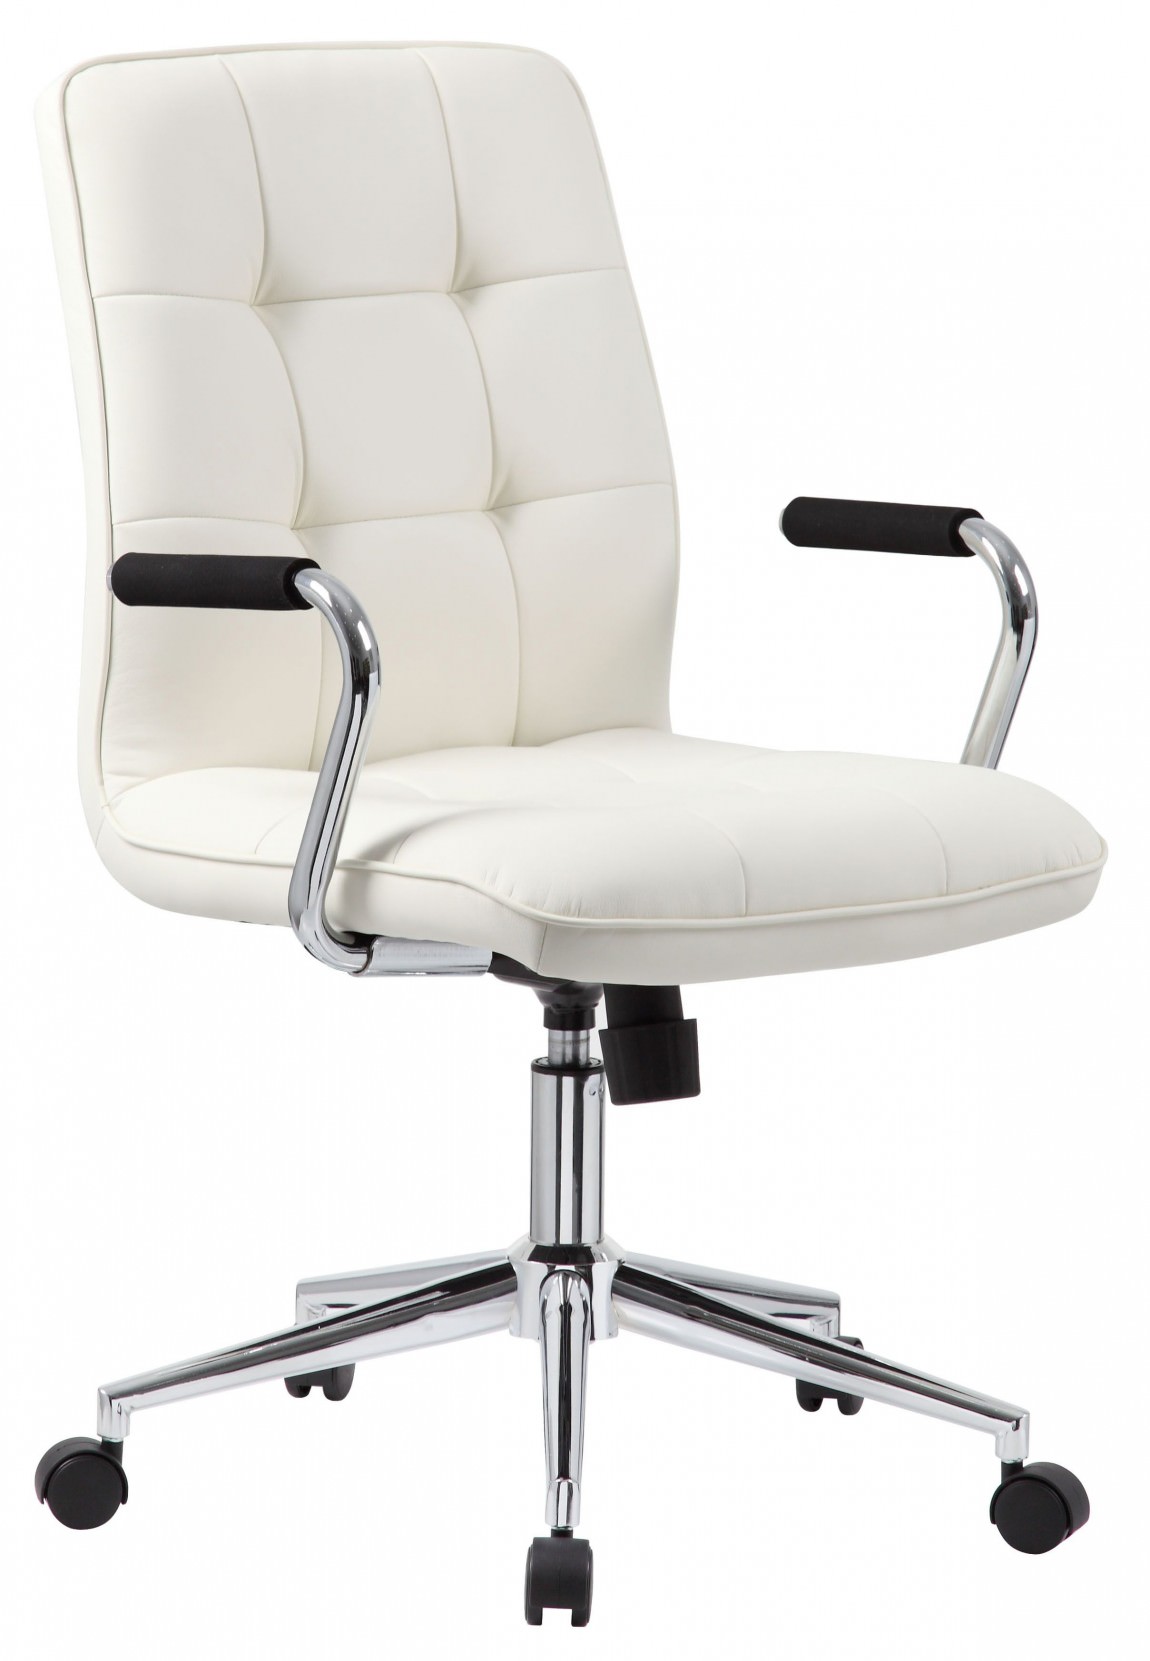 Modern Office Chair with Chrome Arms